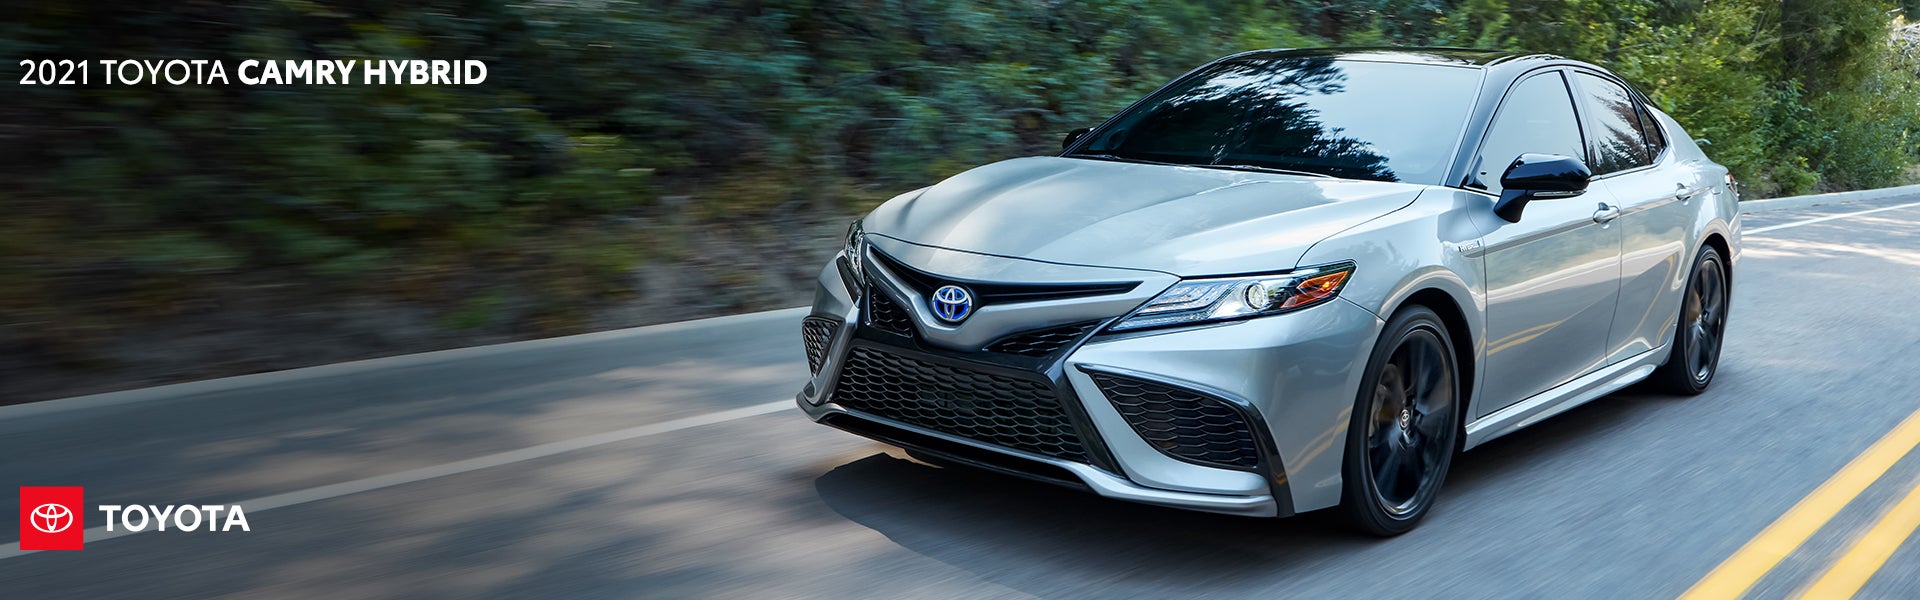 2021 Toyota Camry Hybrid at Rolling Hills Toyota in St. Joseph